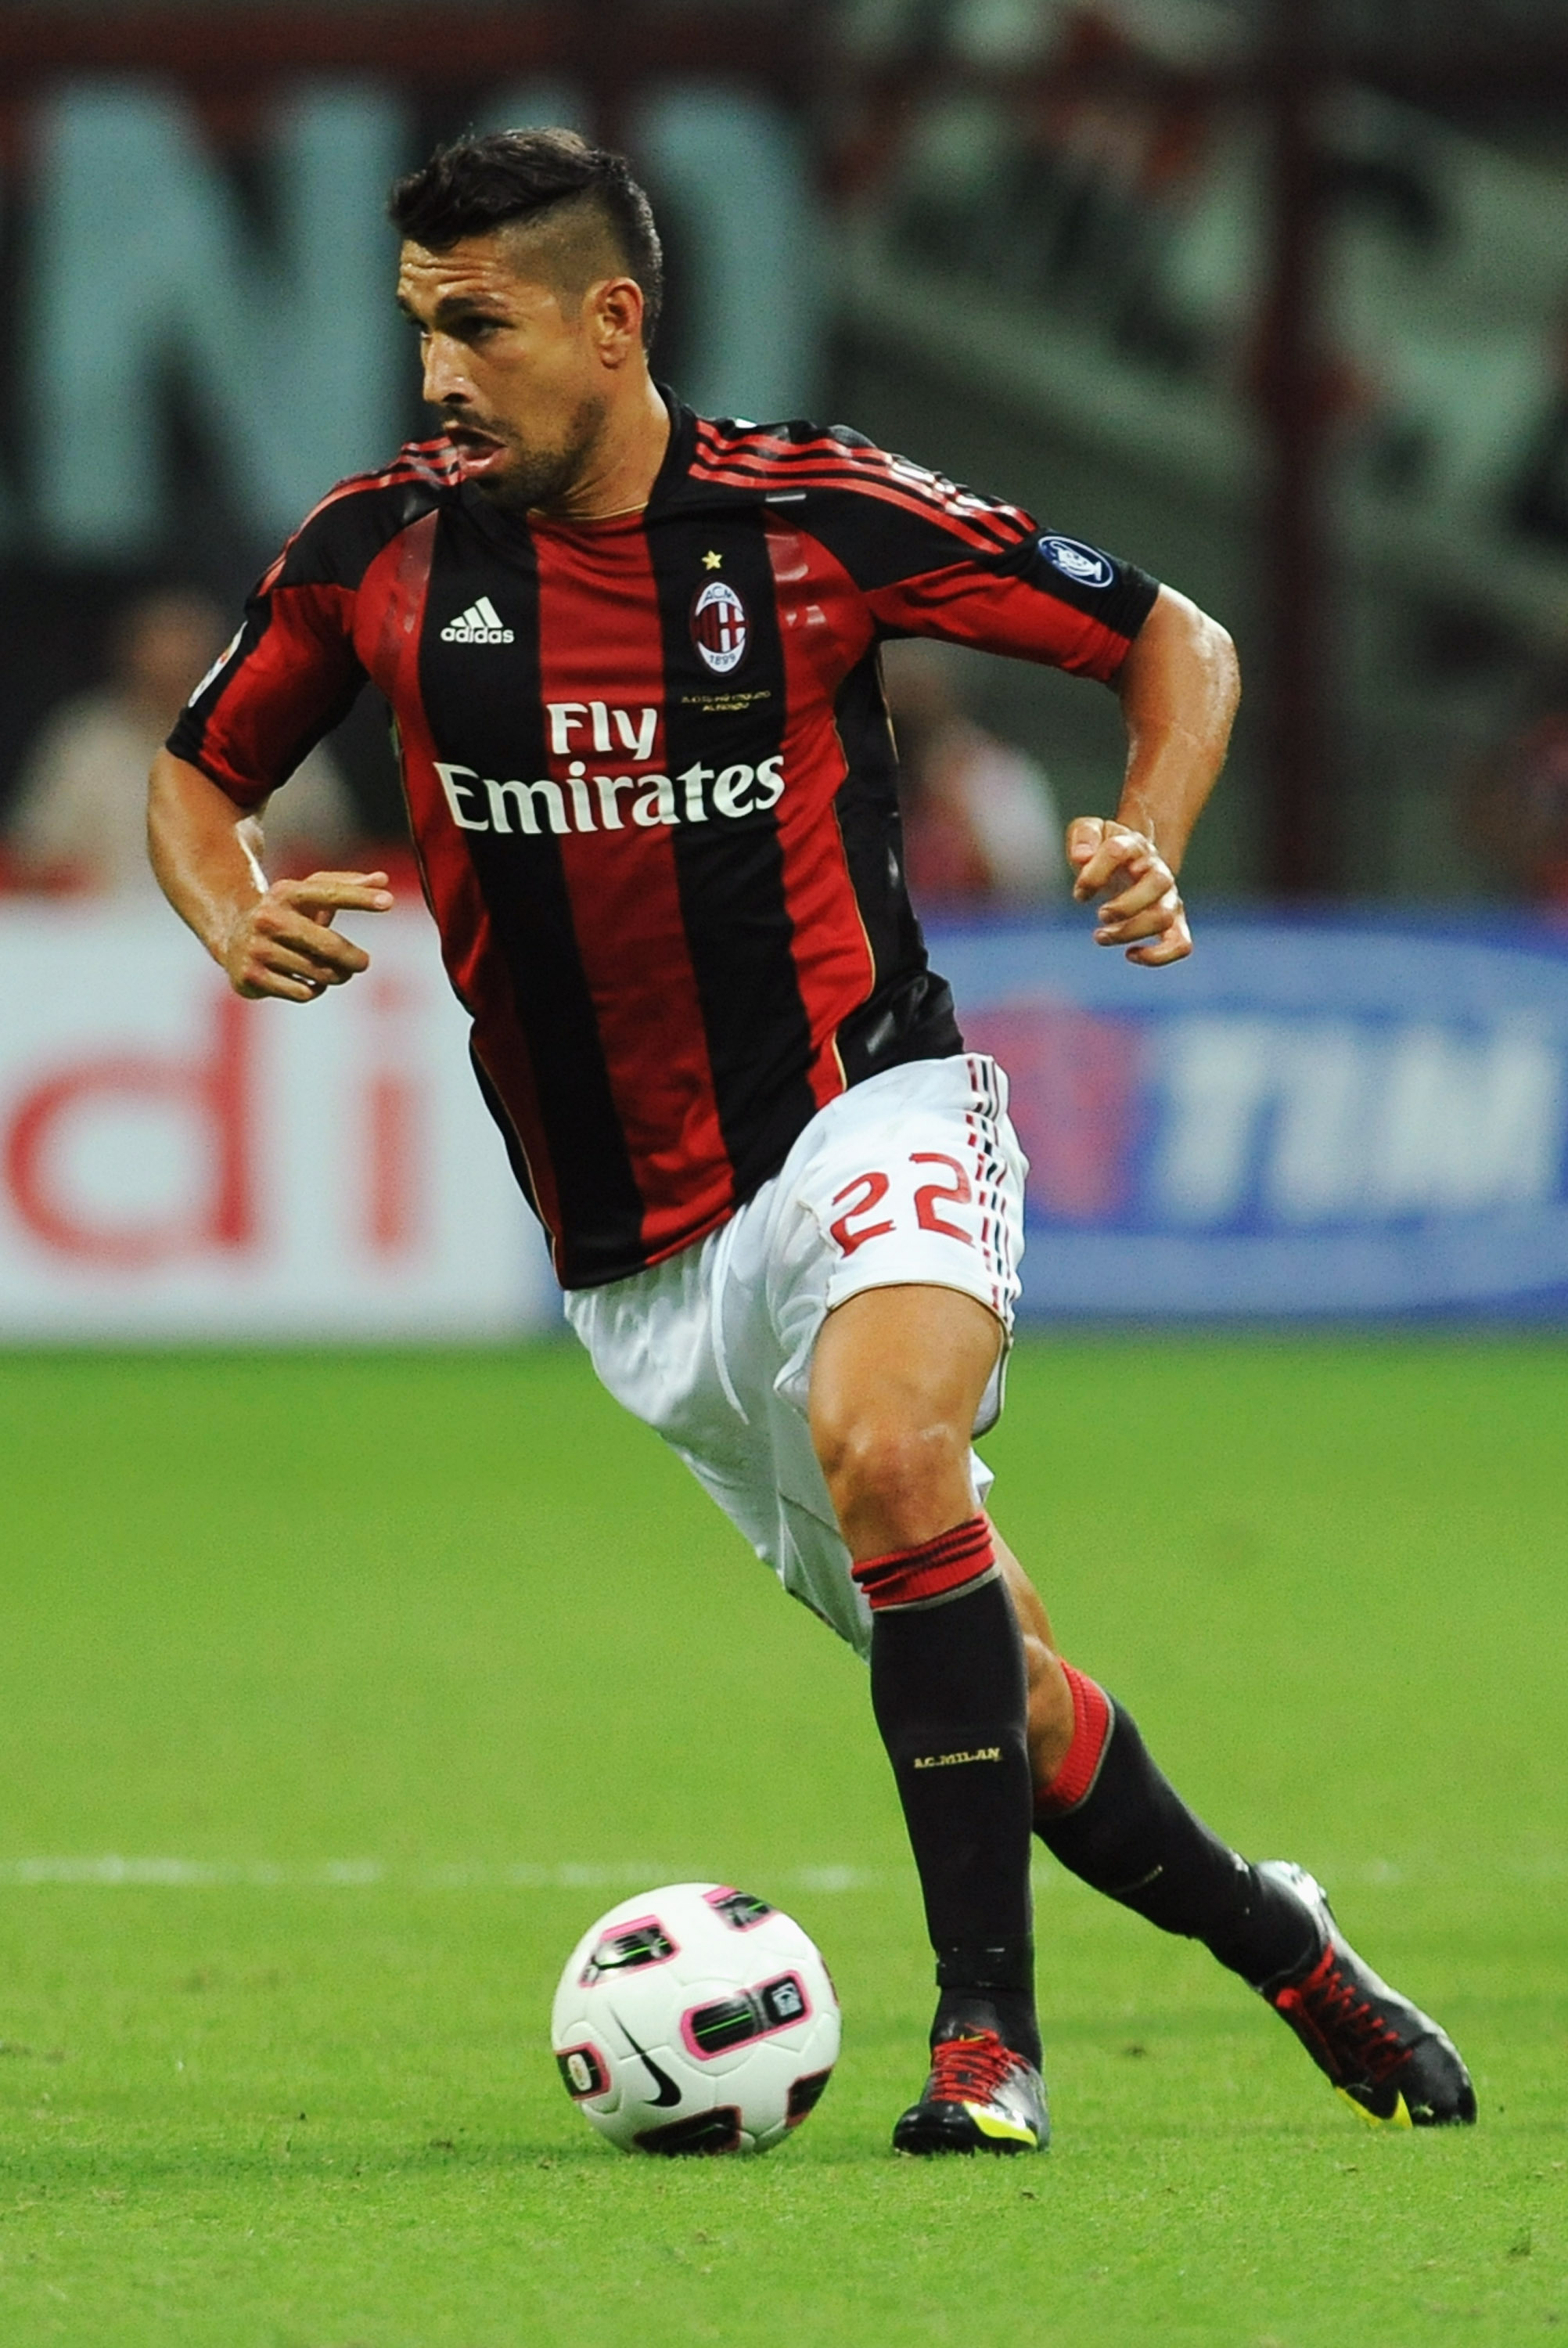 MILAN, ITALY - AUGUST 29:  Marco Borriello of AC Milan in action during the Serie A match between AC Milan and US Lecce at Stadio Giuseppe Meazza on August 29, 2010 in Milan, Italy.  (Photo by Valerio Pennicino/Getty Images)